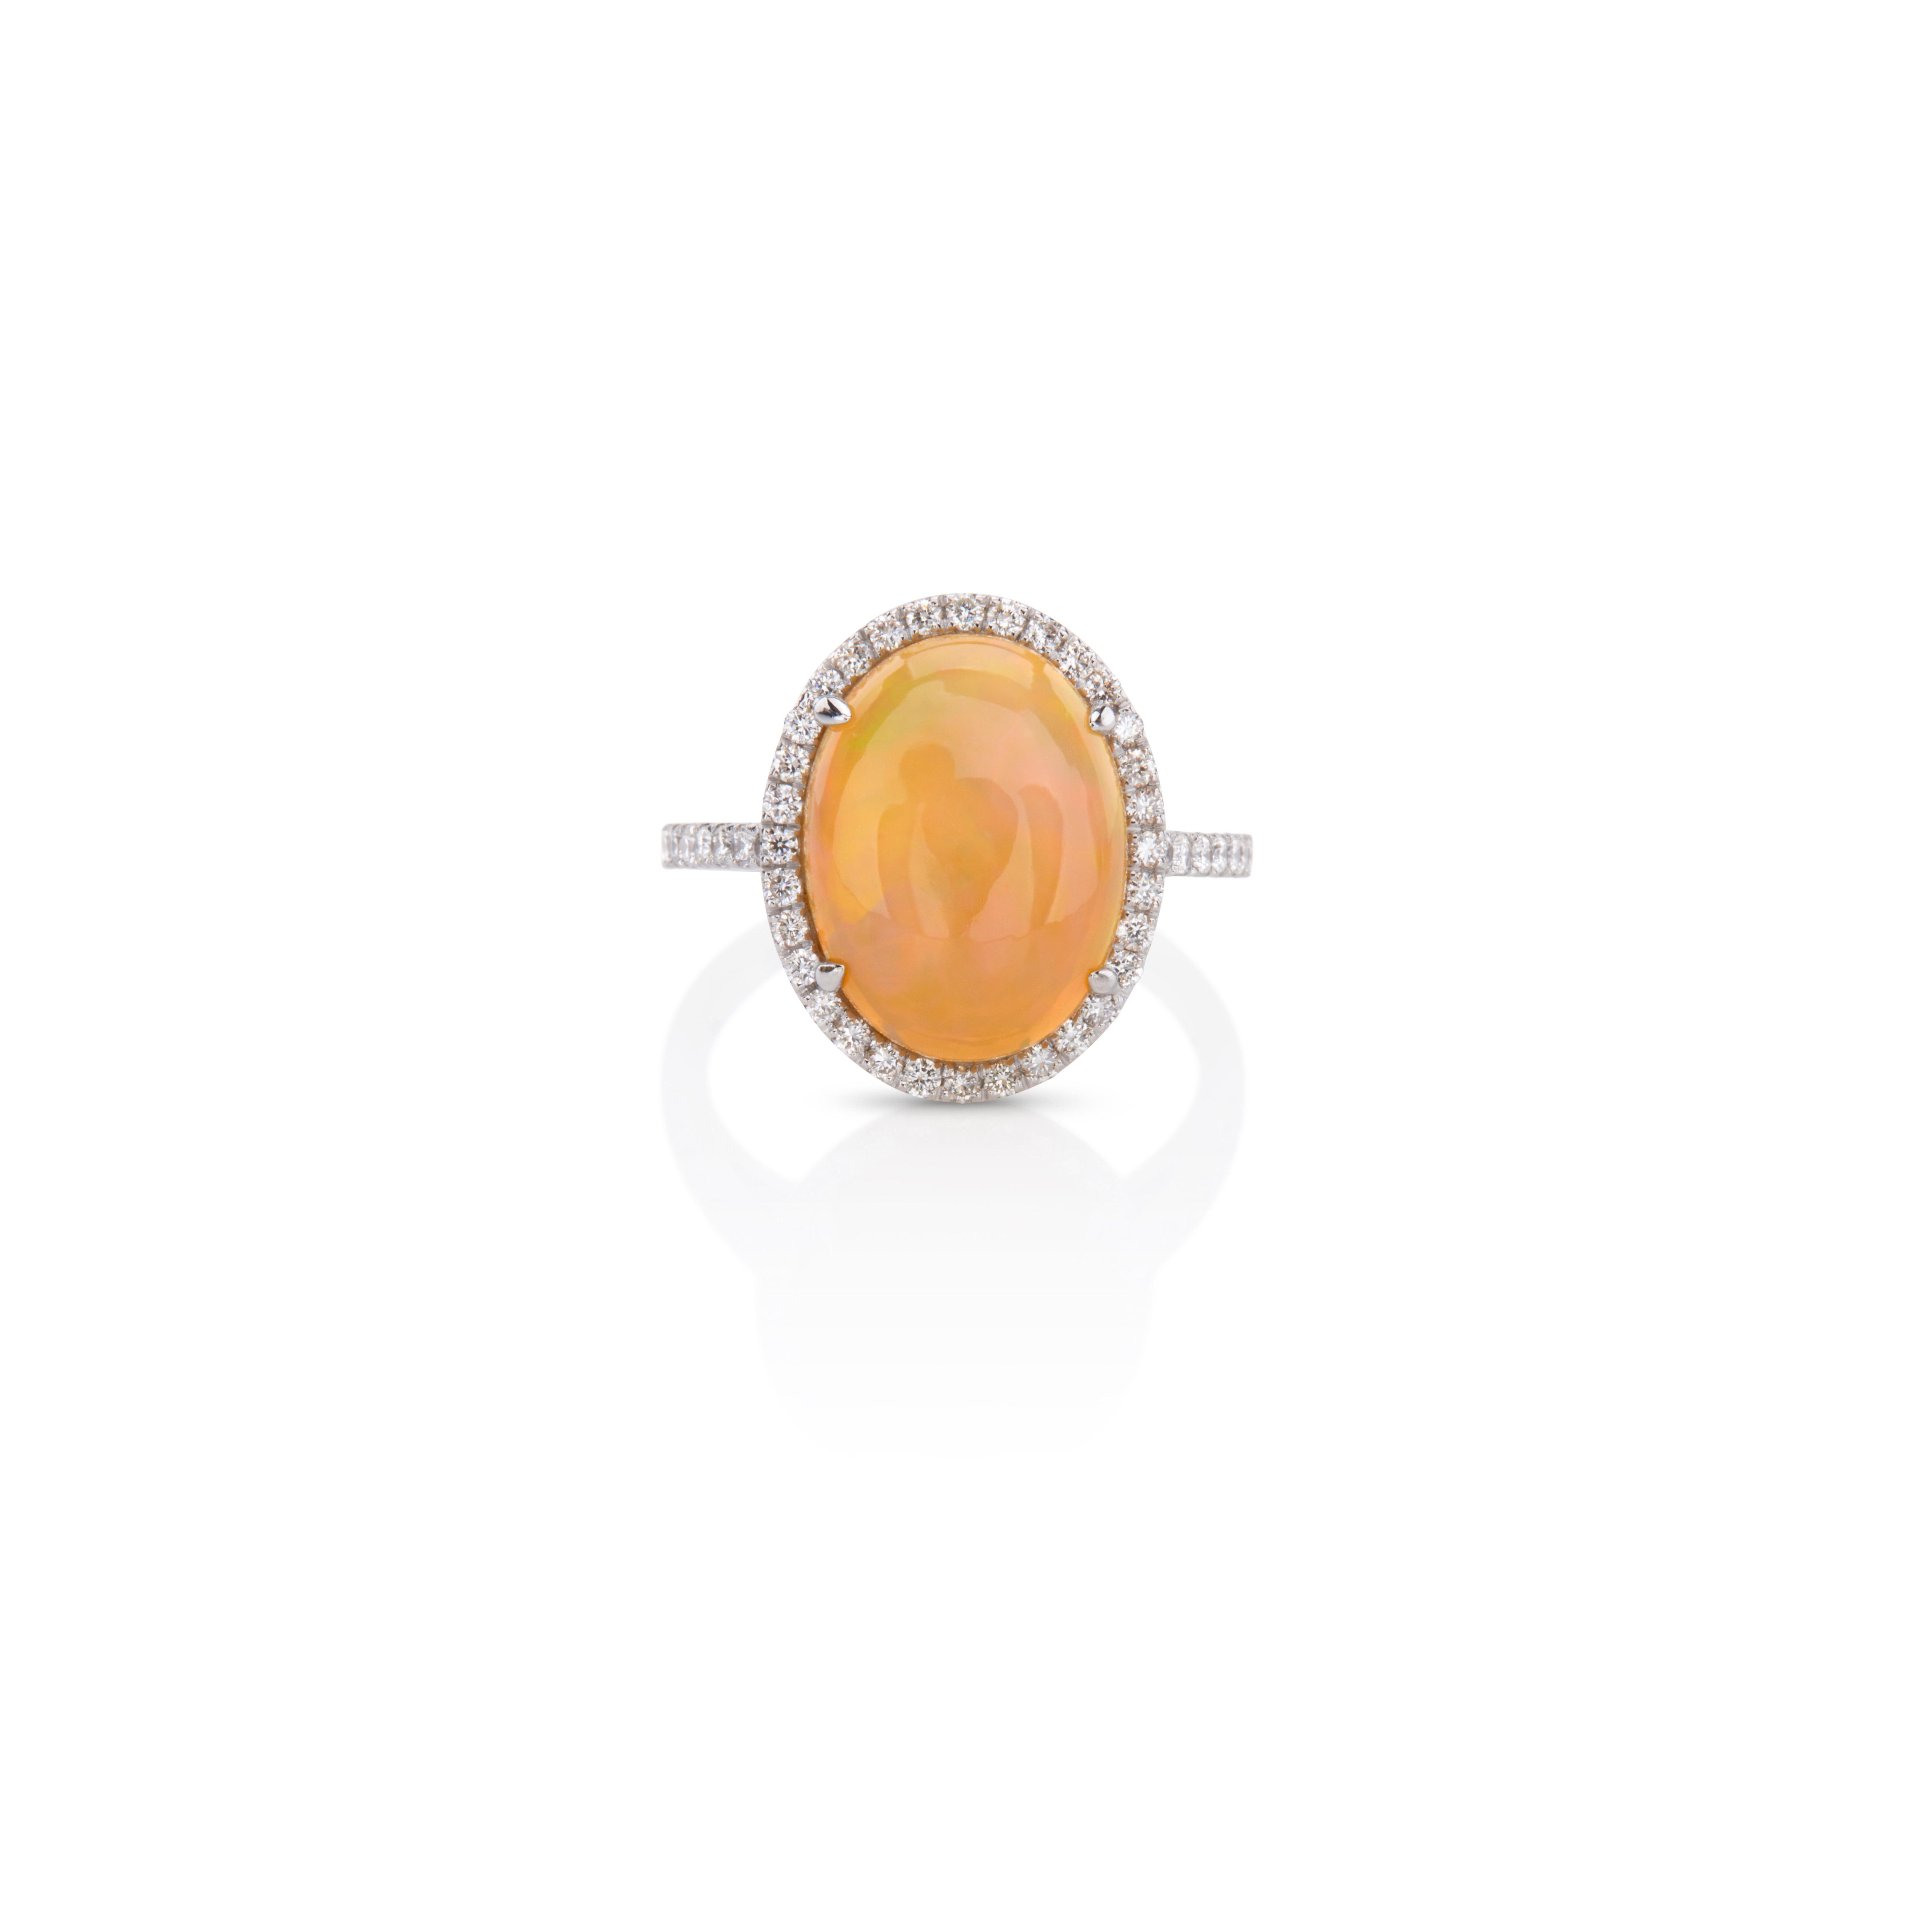 Cluster Ring with 3.20ct Oval-shaped Opal center stone, surrounded by 0.32ct brilliant cut diamonds, handcrafted in 18Kt White Gold.
A Halo of Pavé diamonds illuminate this ring, adding a striking radiance to the design while the opal glitters and